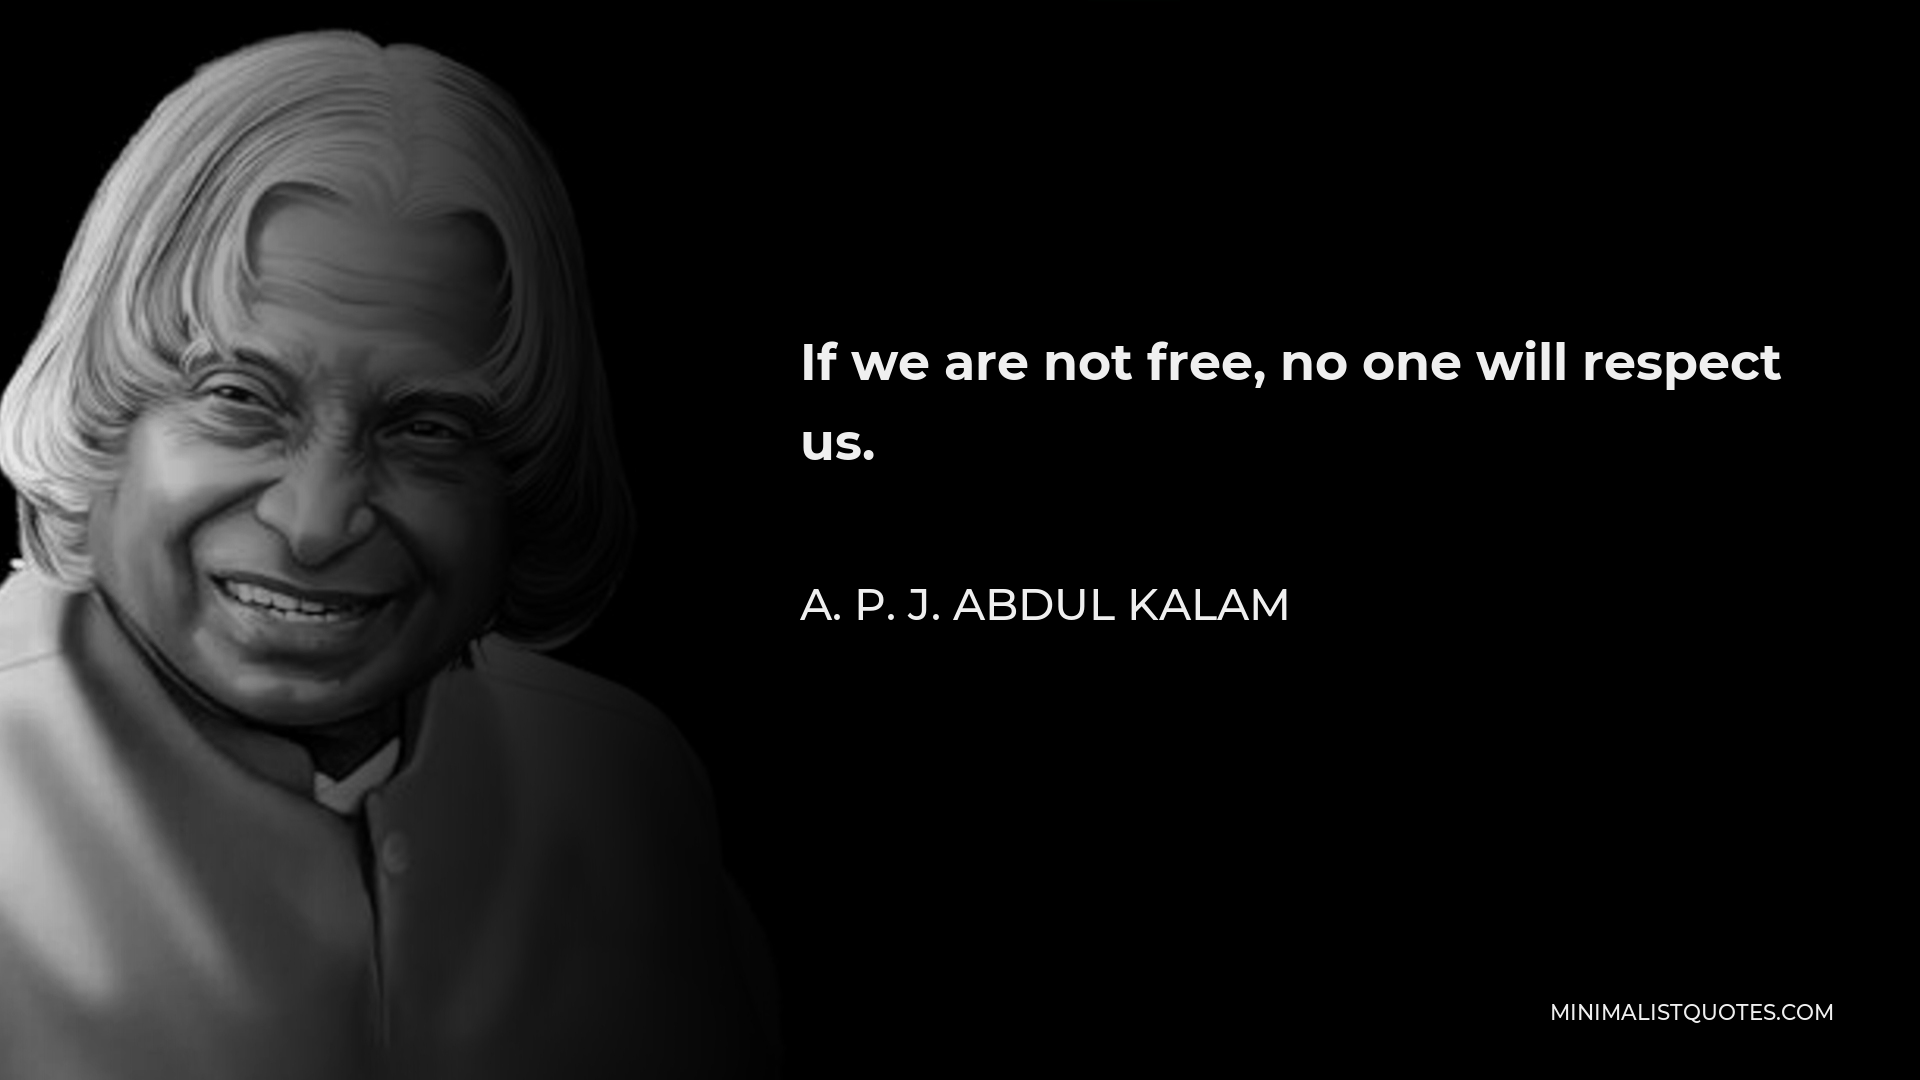 A. P. J. Abdul Kalam Quote - If we are not free, no one will respect us.